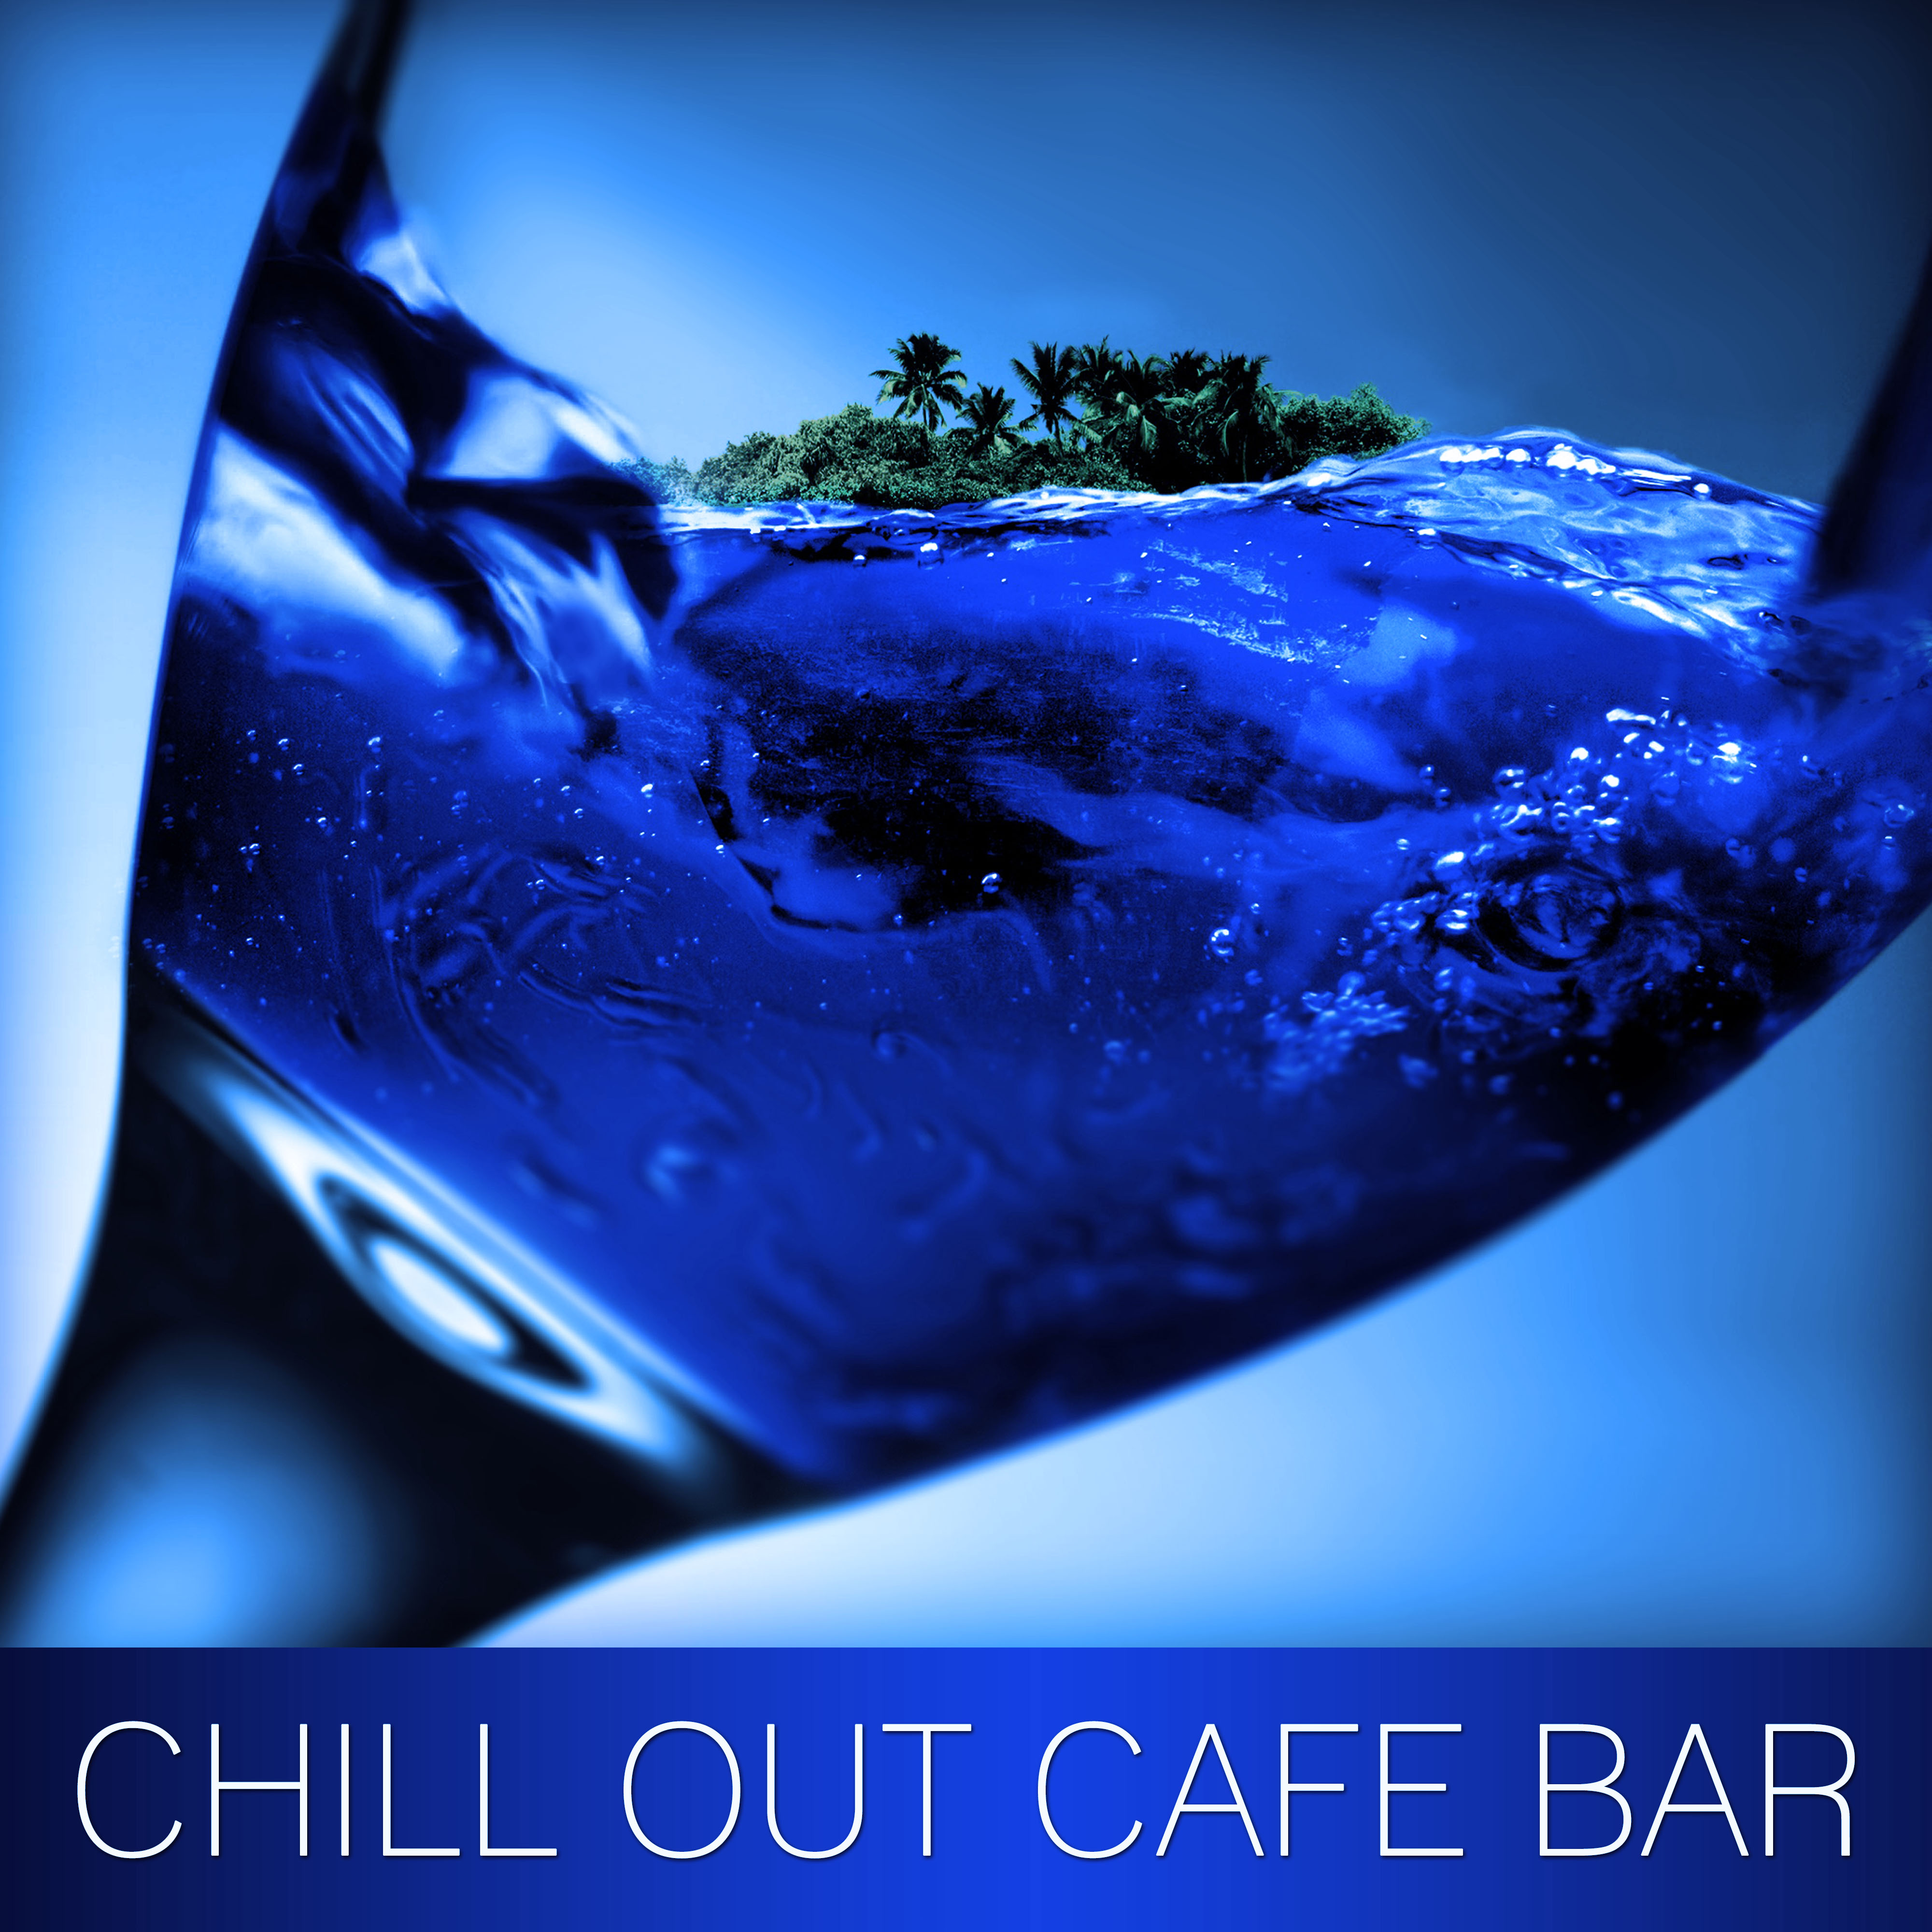 Chill Out Cafe Bar – Blue Lagoon, Drink Bar, Cocktail Party Ibiza, Miami Beach